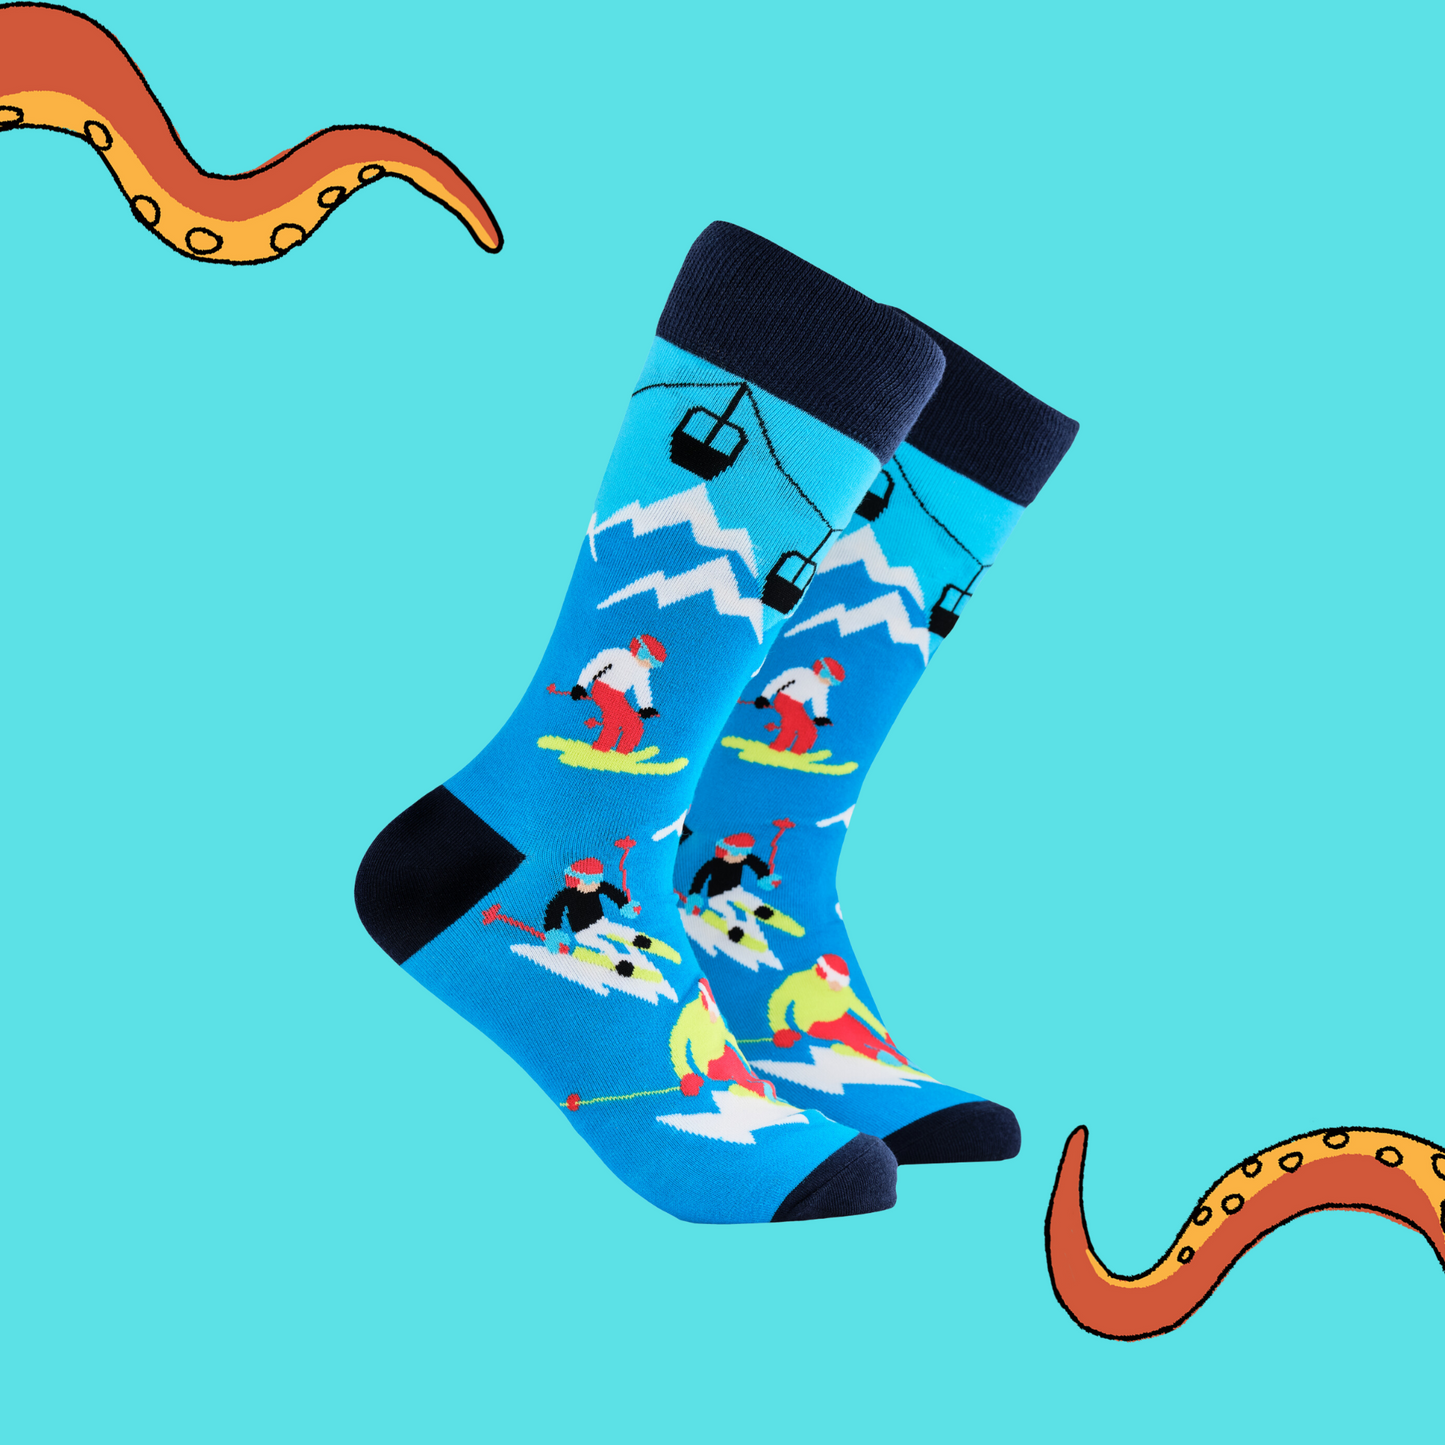 A pair of socks depicting skiers on the slopes. Blue legs, dark blue cuff, heel and toe.